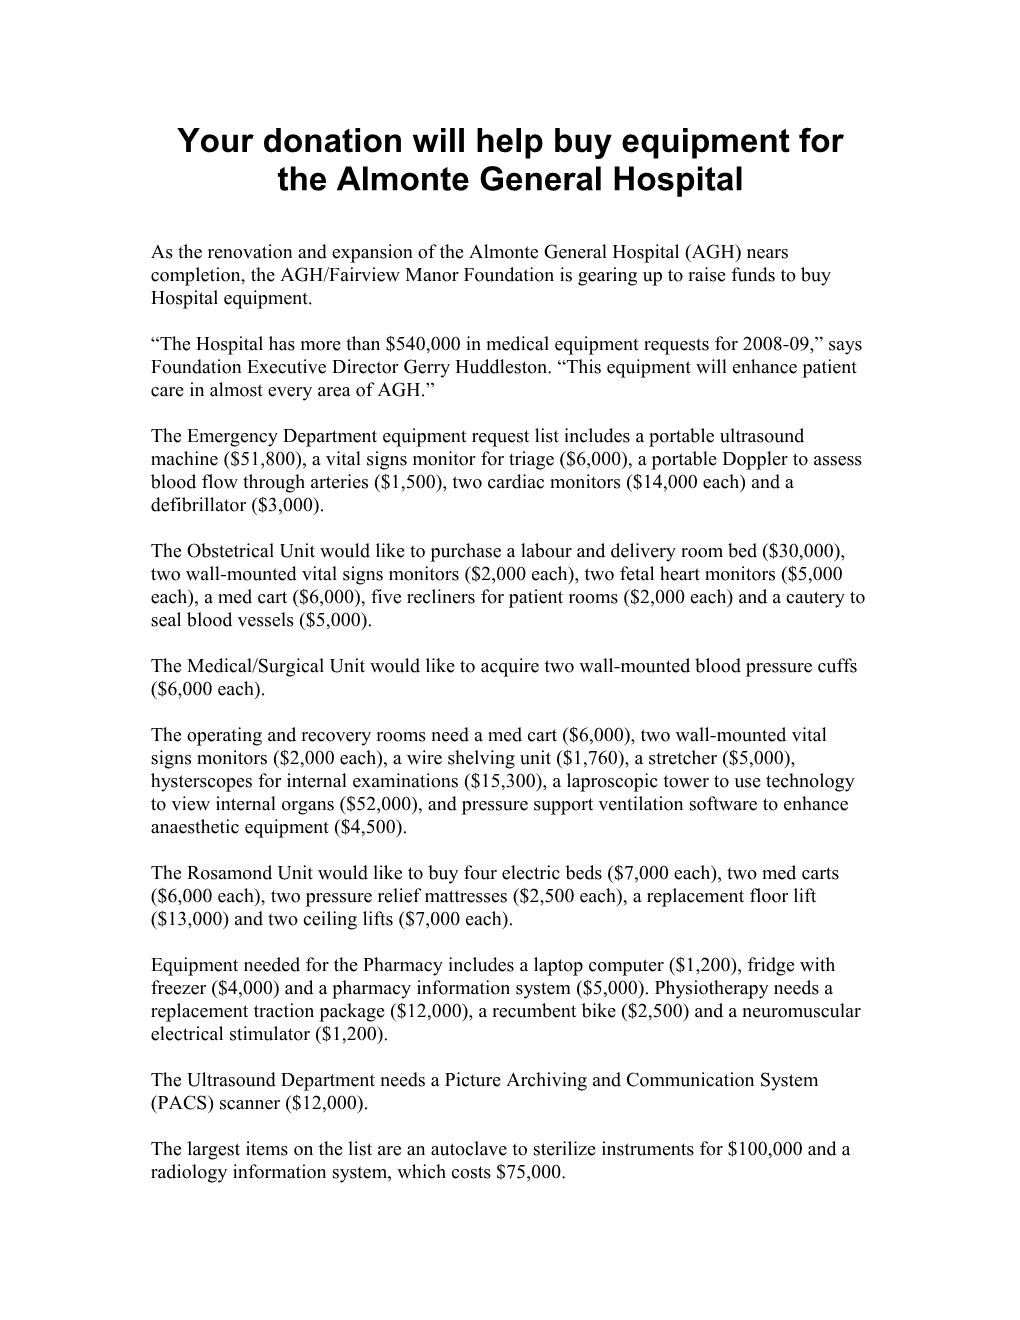 Your Donation Will Help Buy Equipment for the Almonte General Hospital